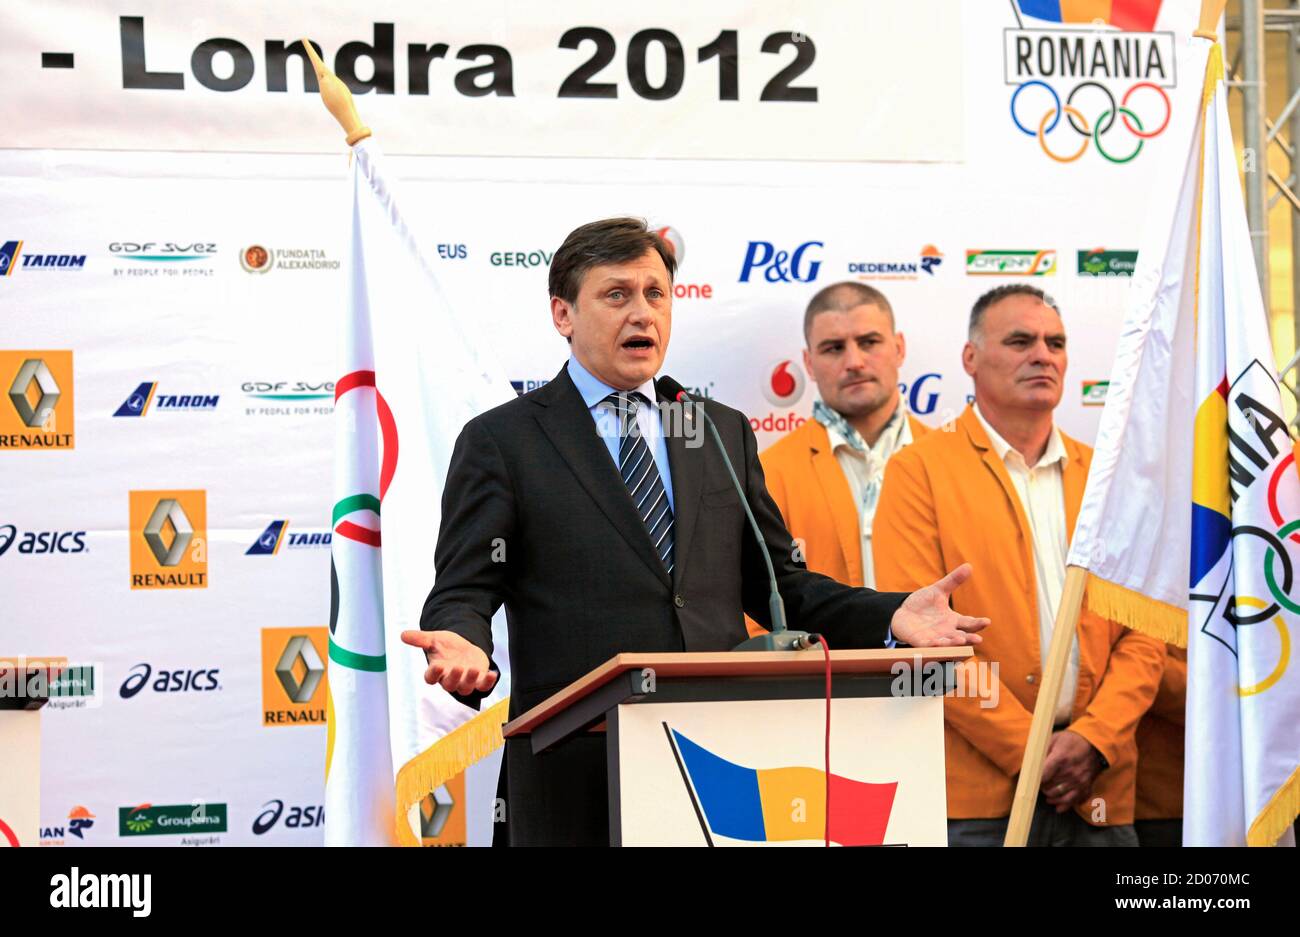 Romania's interim president Crin Antonescu speaks during a ceremony introducing the country's athletes for the 2012 London Olympics in Bucharest July 19, 2012. REUTERS/Radu Sigheti (ROMANIA - Tags: POLITICS SPORT OLYMPICS) Stock Photo